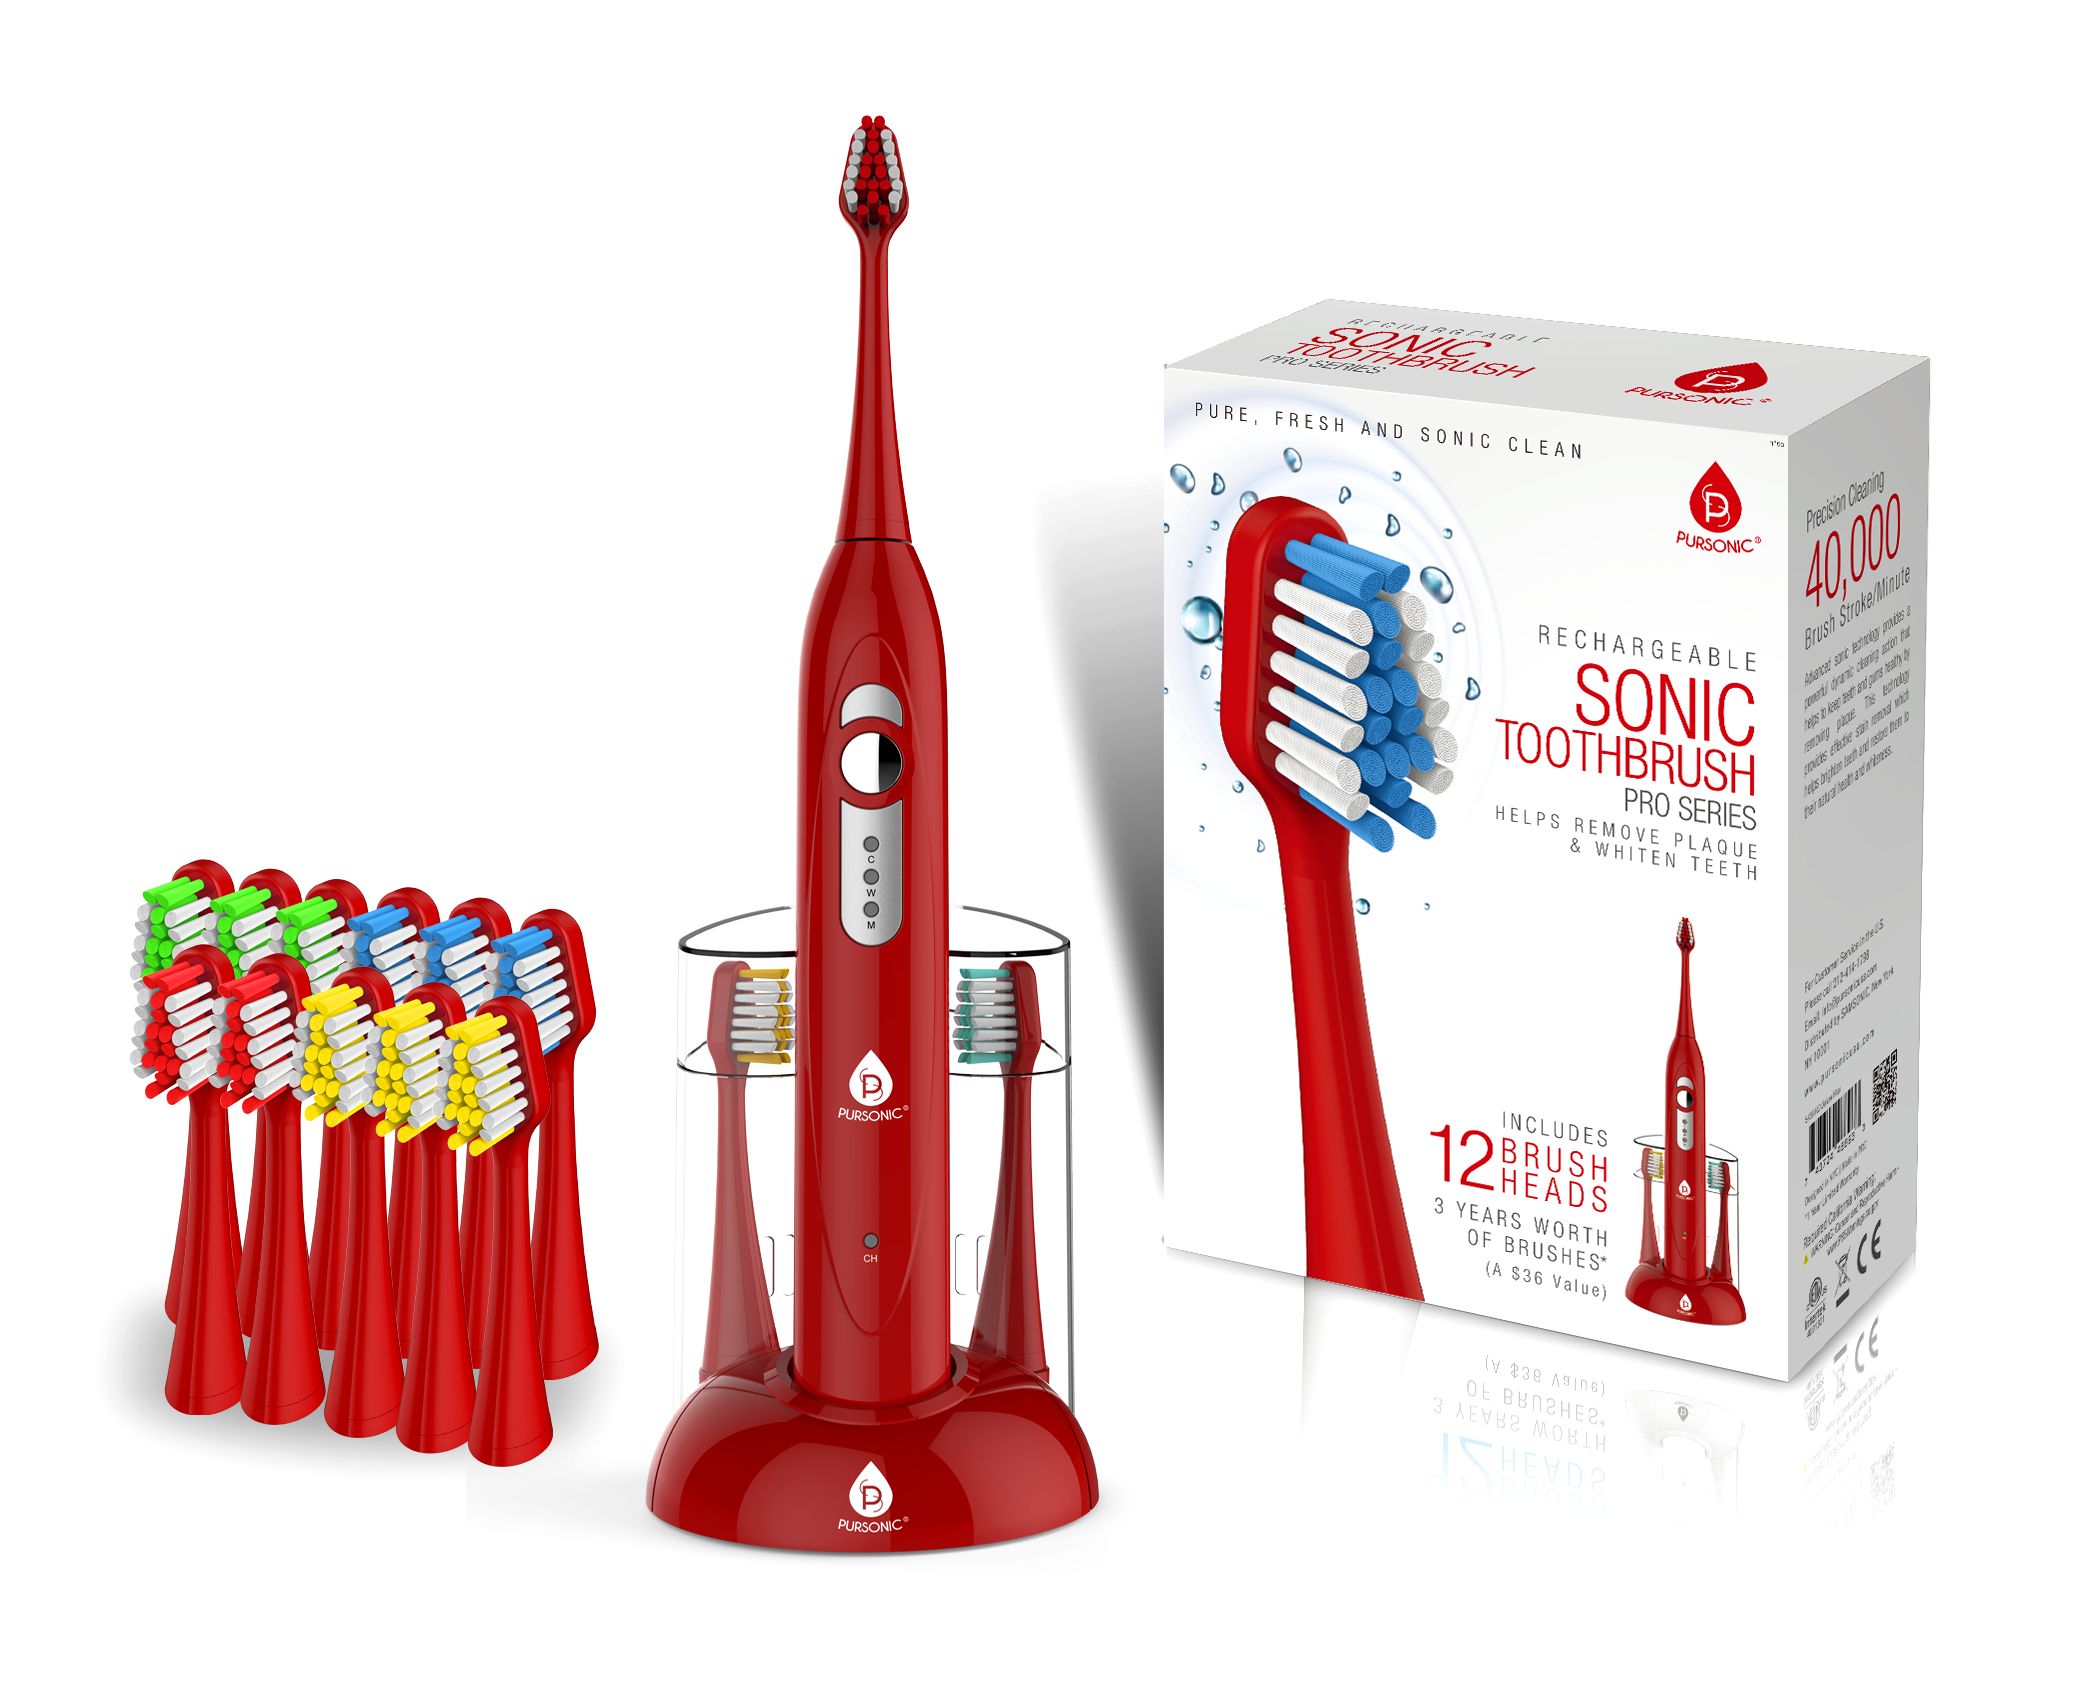 S430rd Pursonic 40k Spm Sonic Movement Rechargeable Electric Toothbrush With Bouns 12 Brusheads, Red